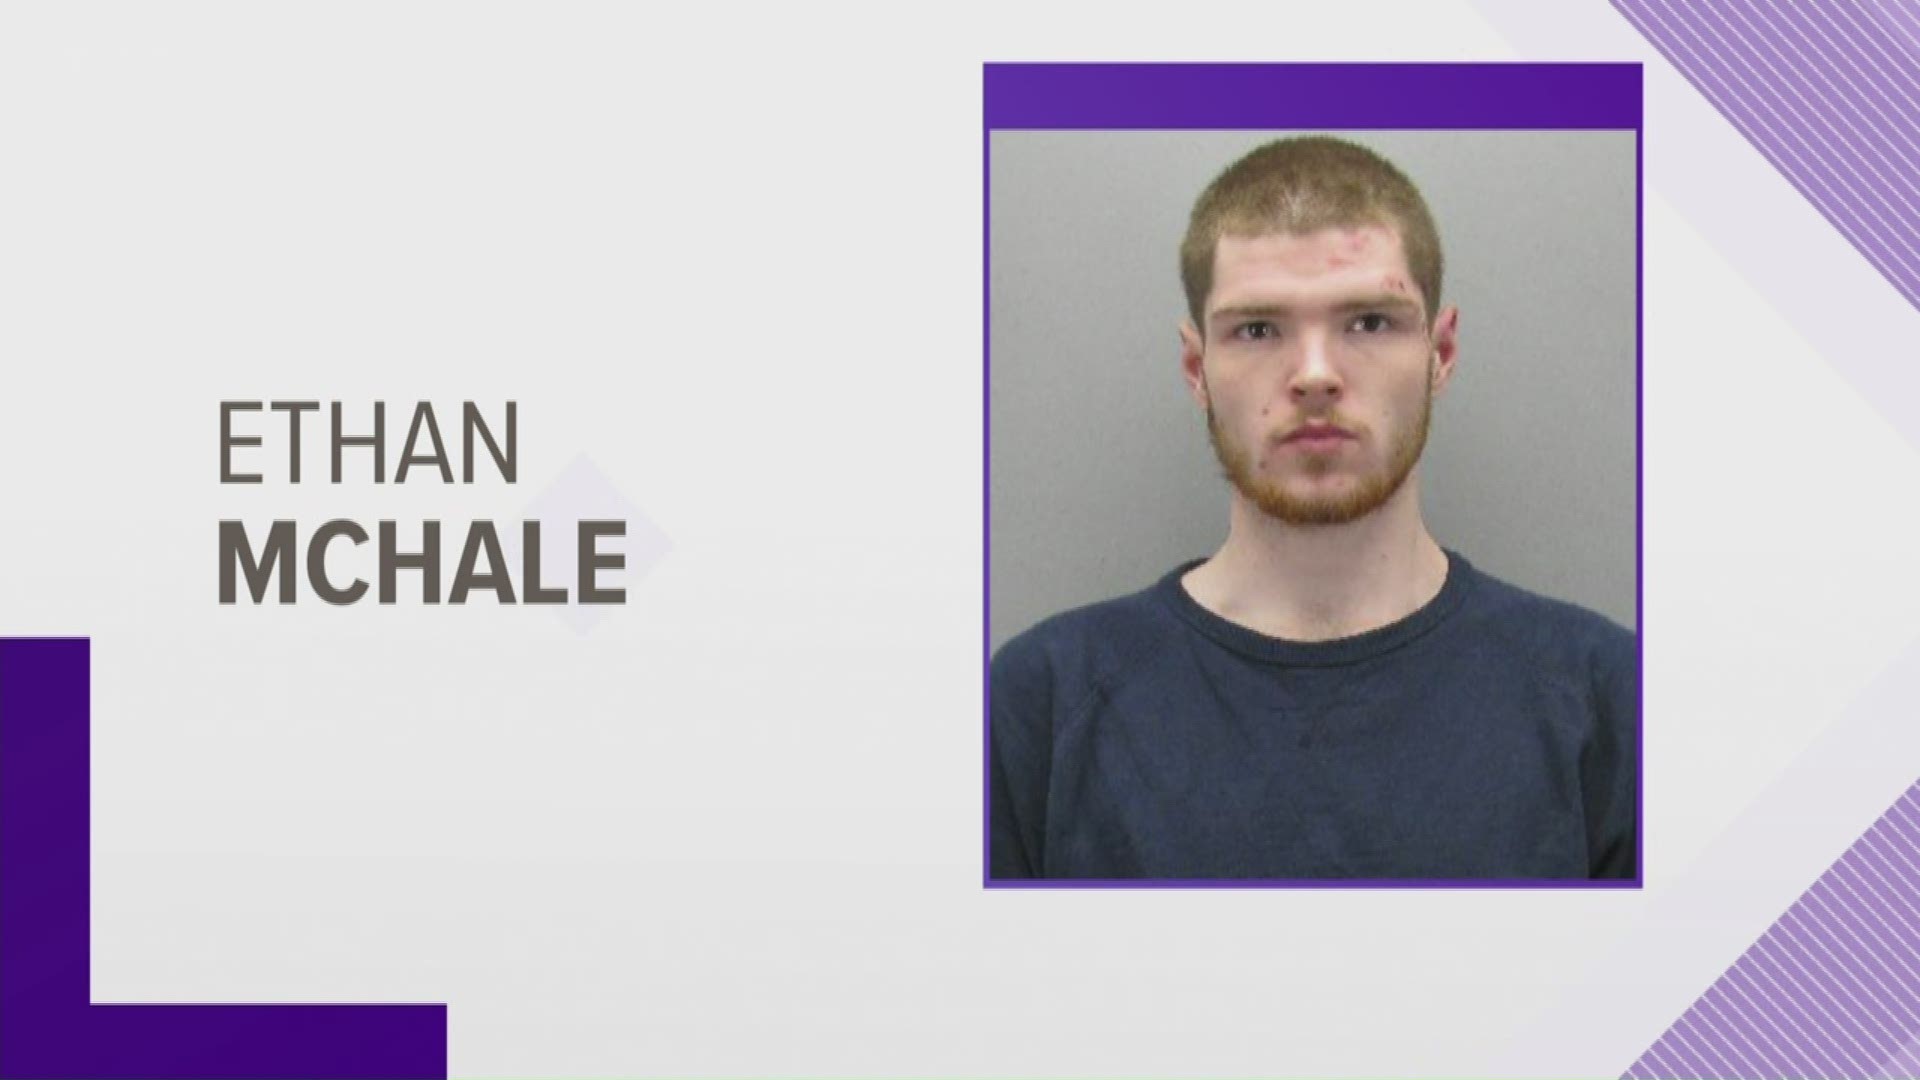 Ethan AJ McHale, 21, faces several charges following a police chase in the City of Dunkirk on Tuesday evening.